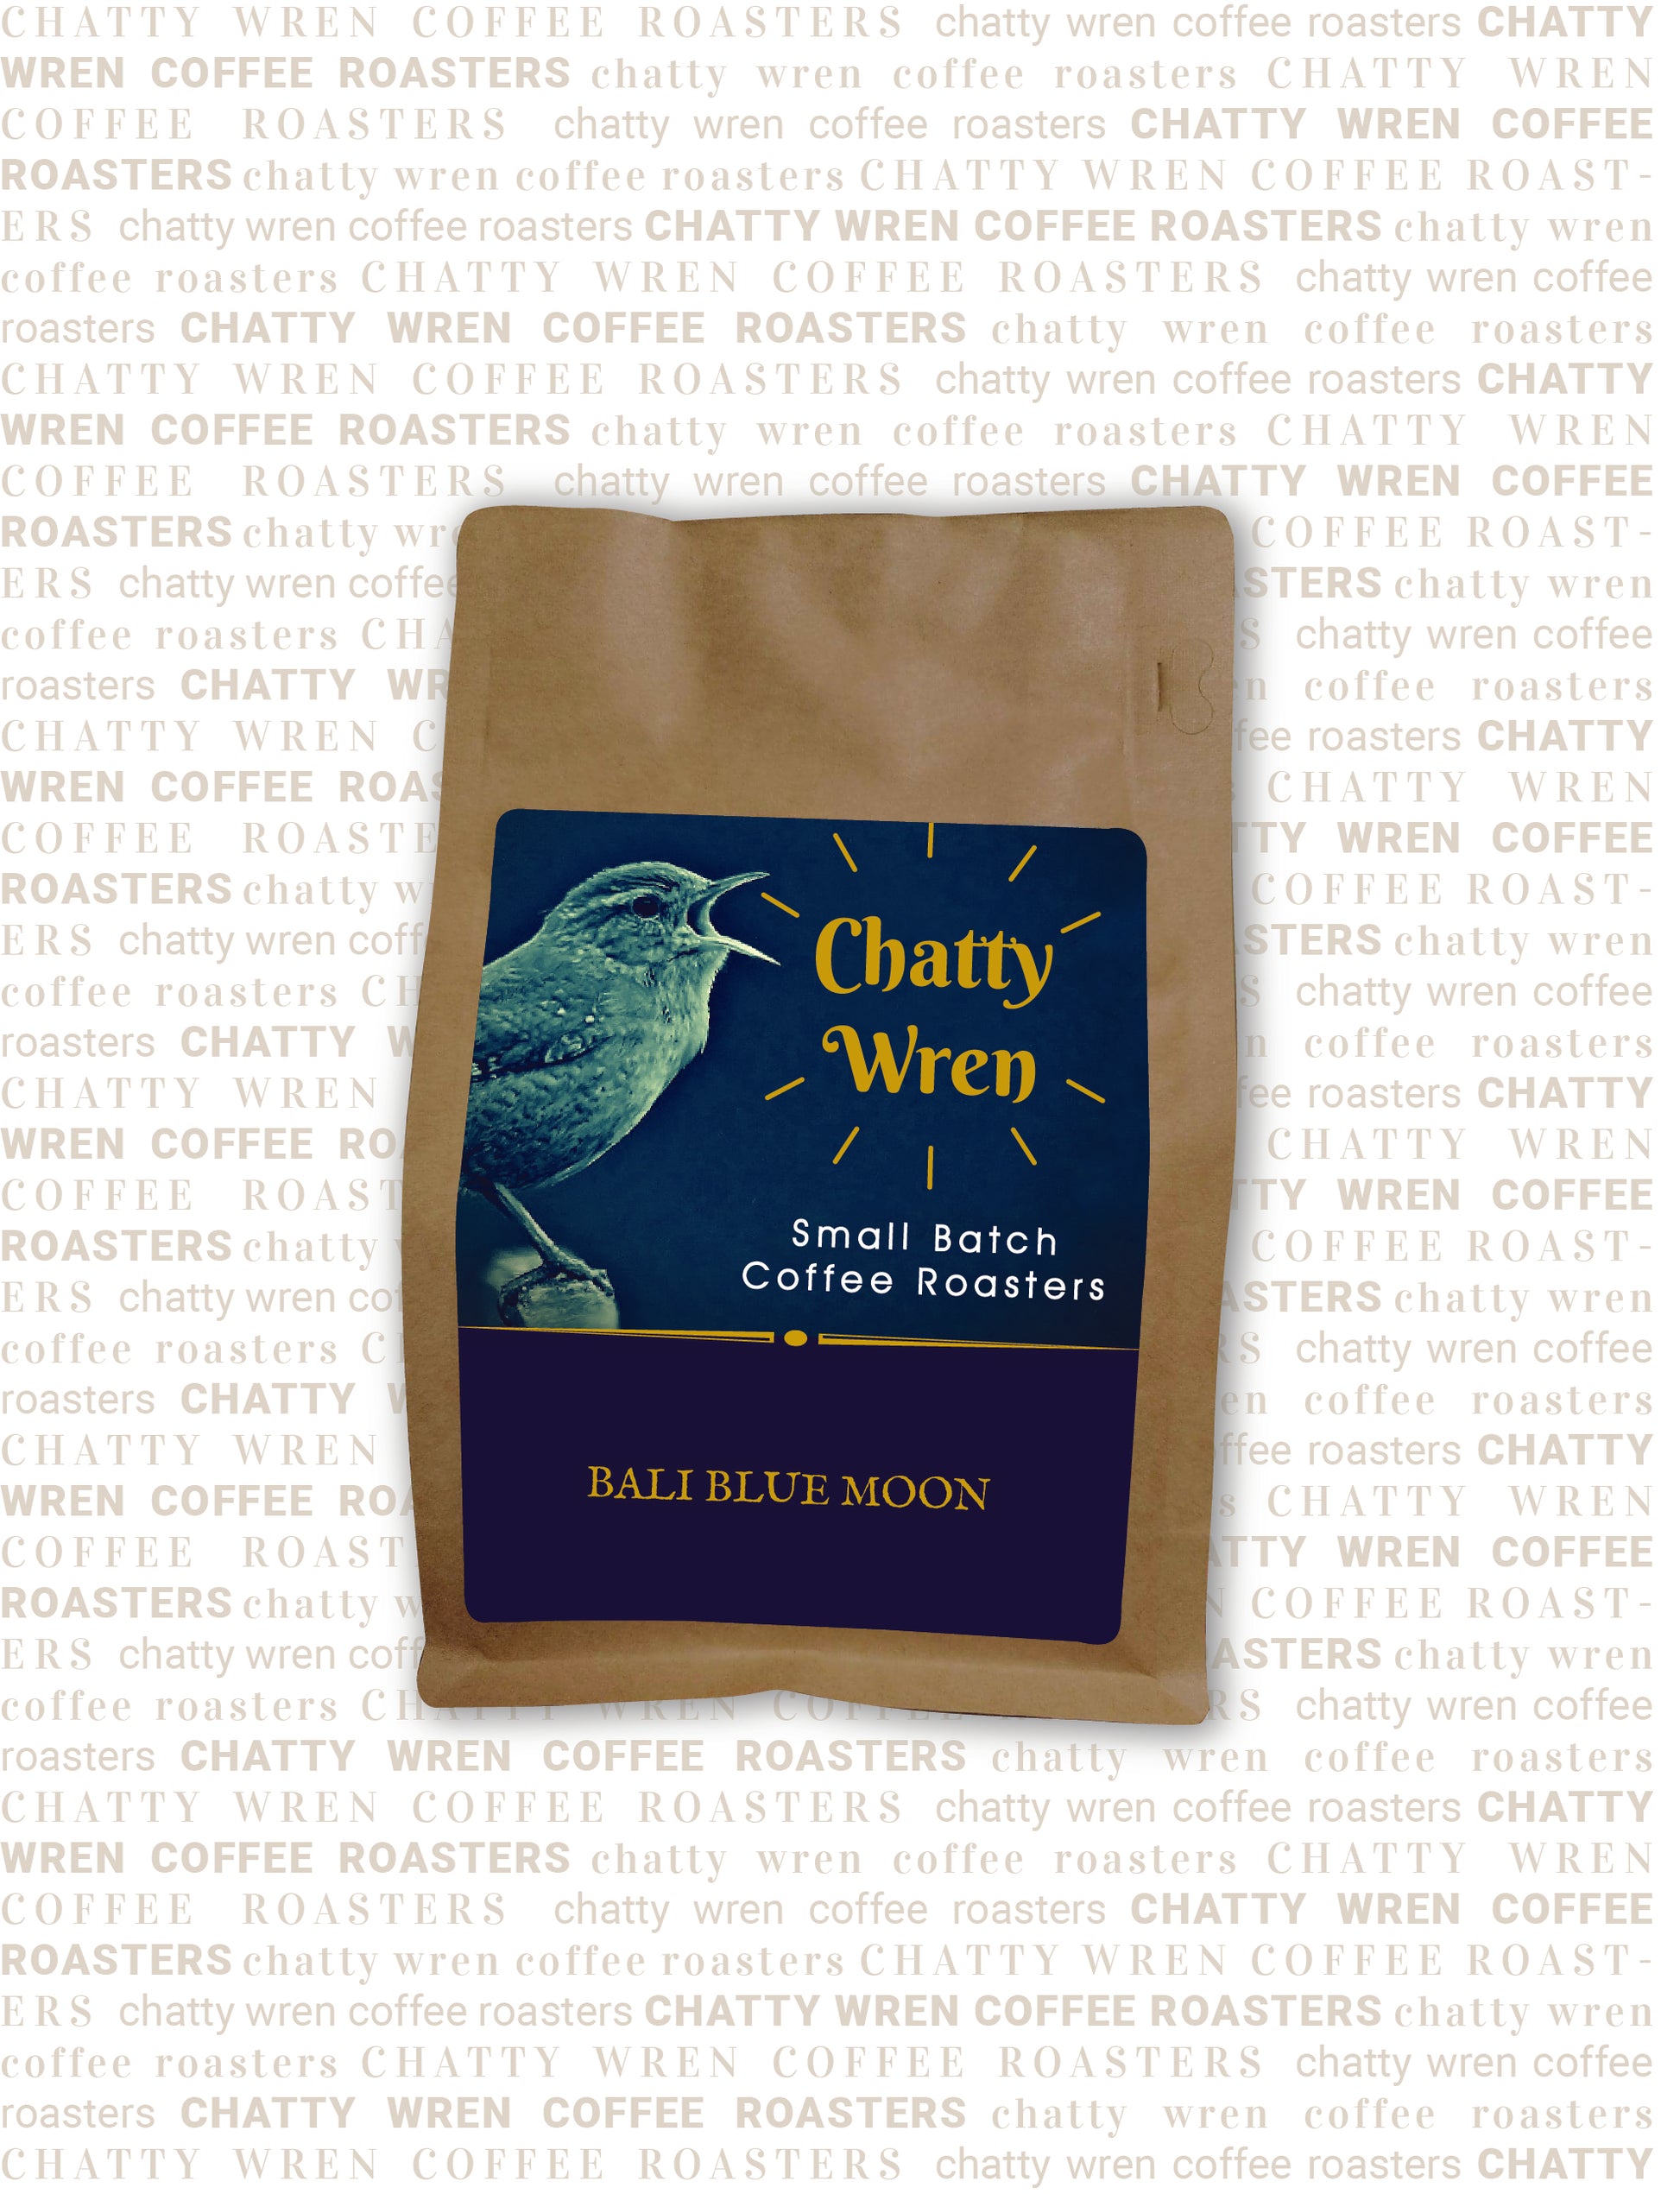 Chatty Wren coffee bag with royal blue section that says 'Bali Blue Moon'